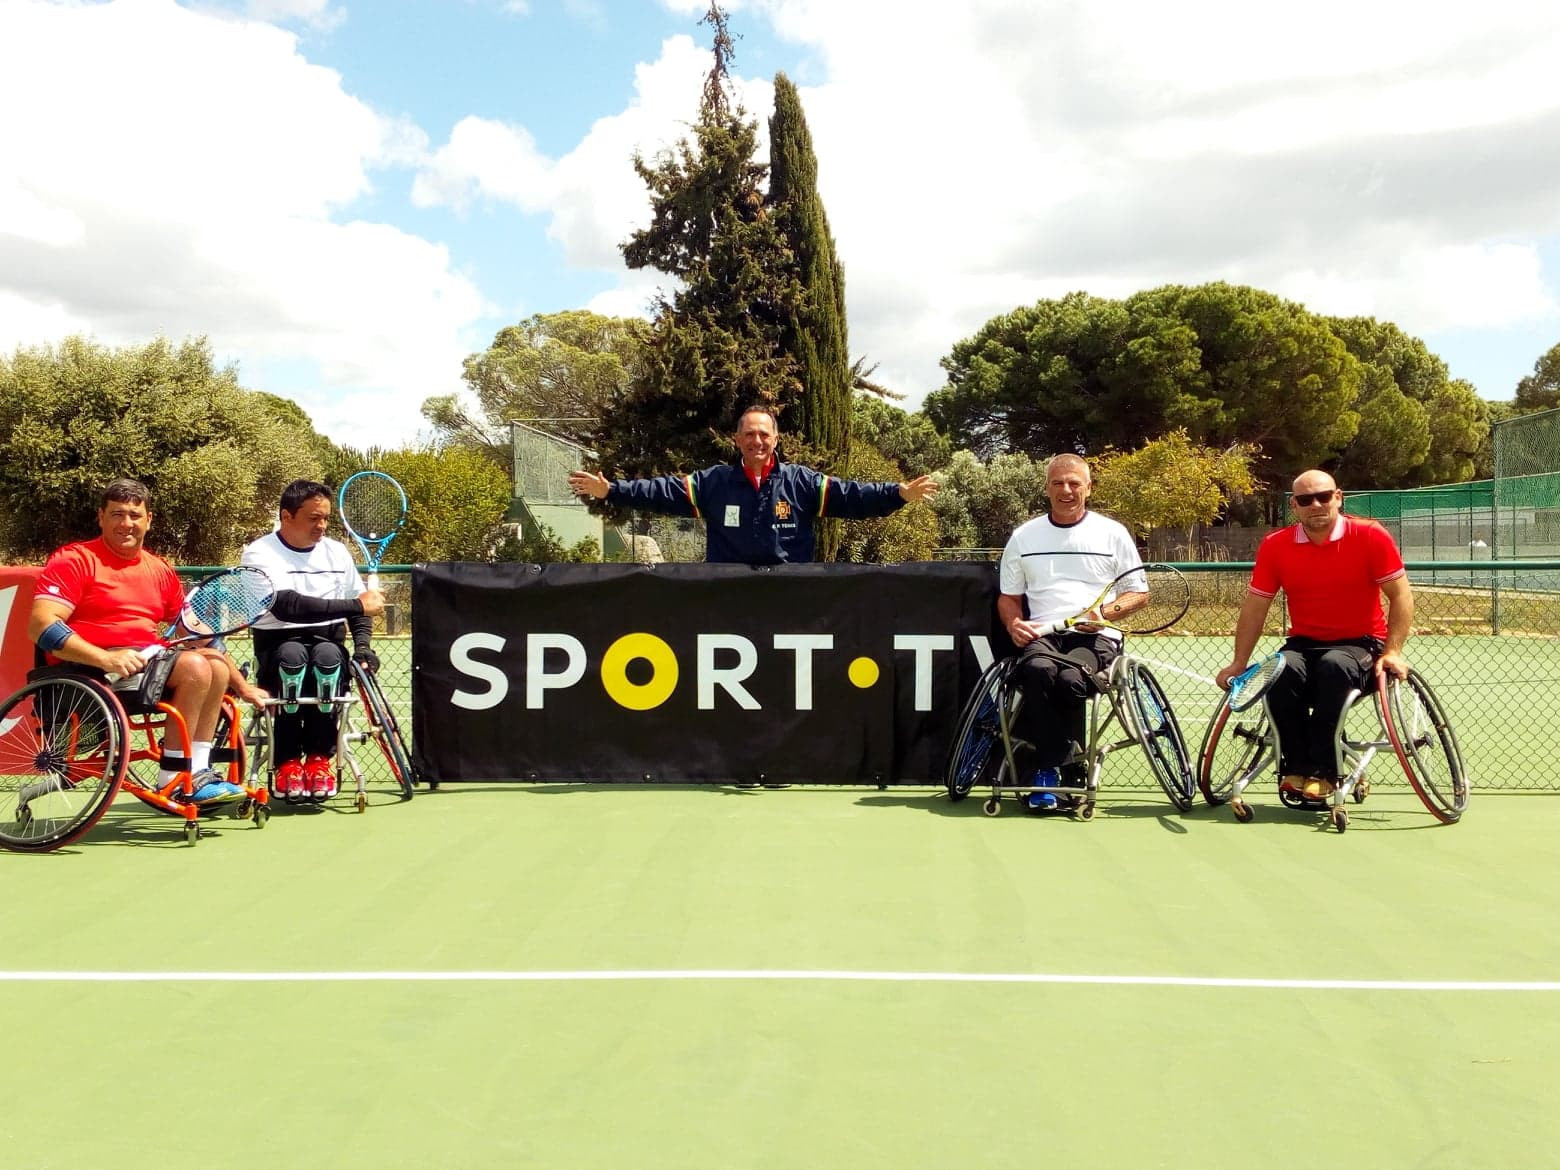 Today's finals went ahead in windy conditions after yesterday's semis were disrupted by rain ©Vilamoura Tennis Academy